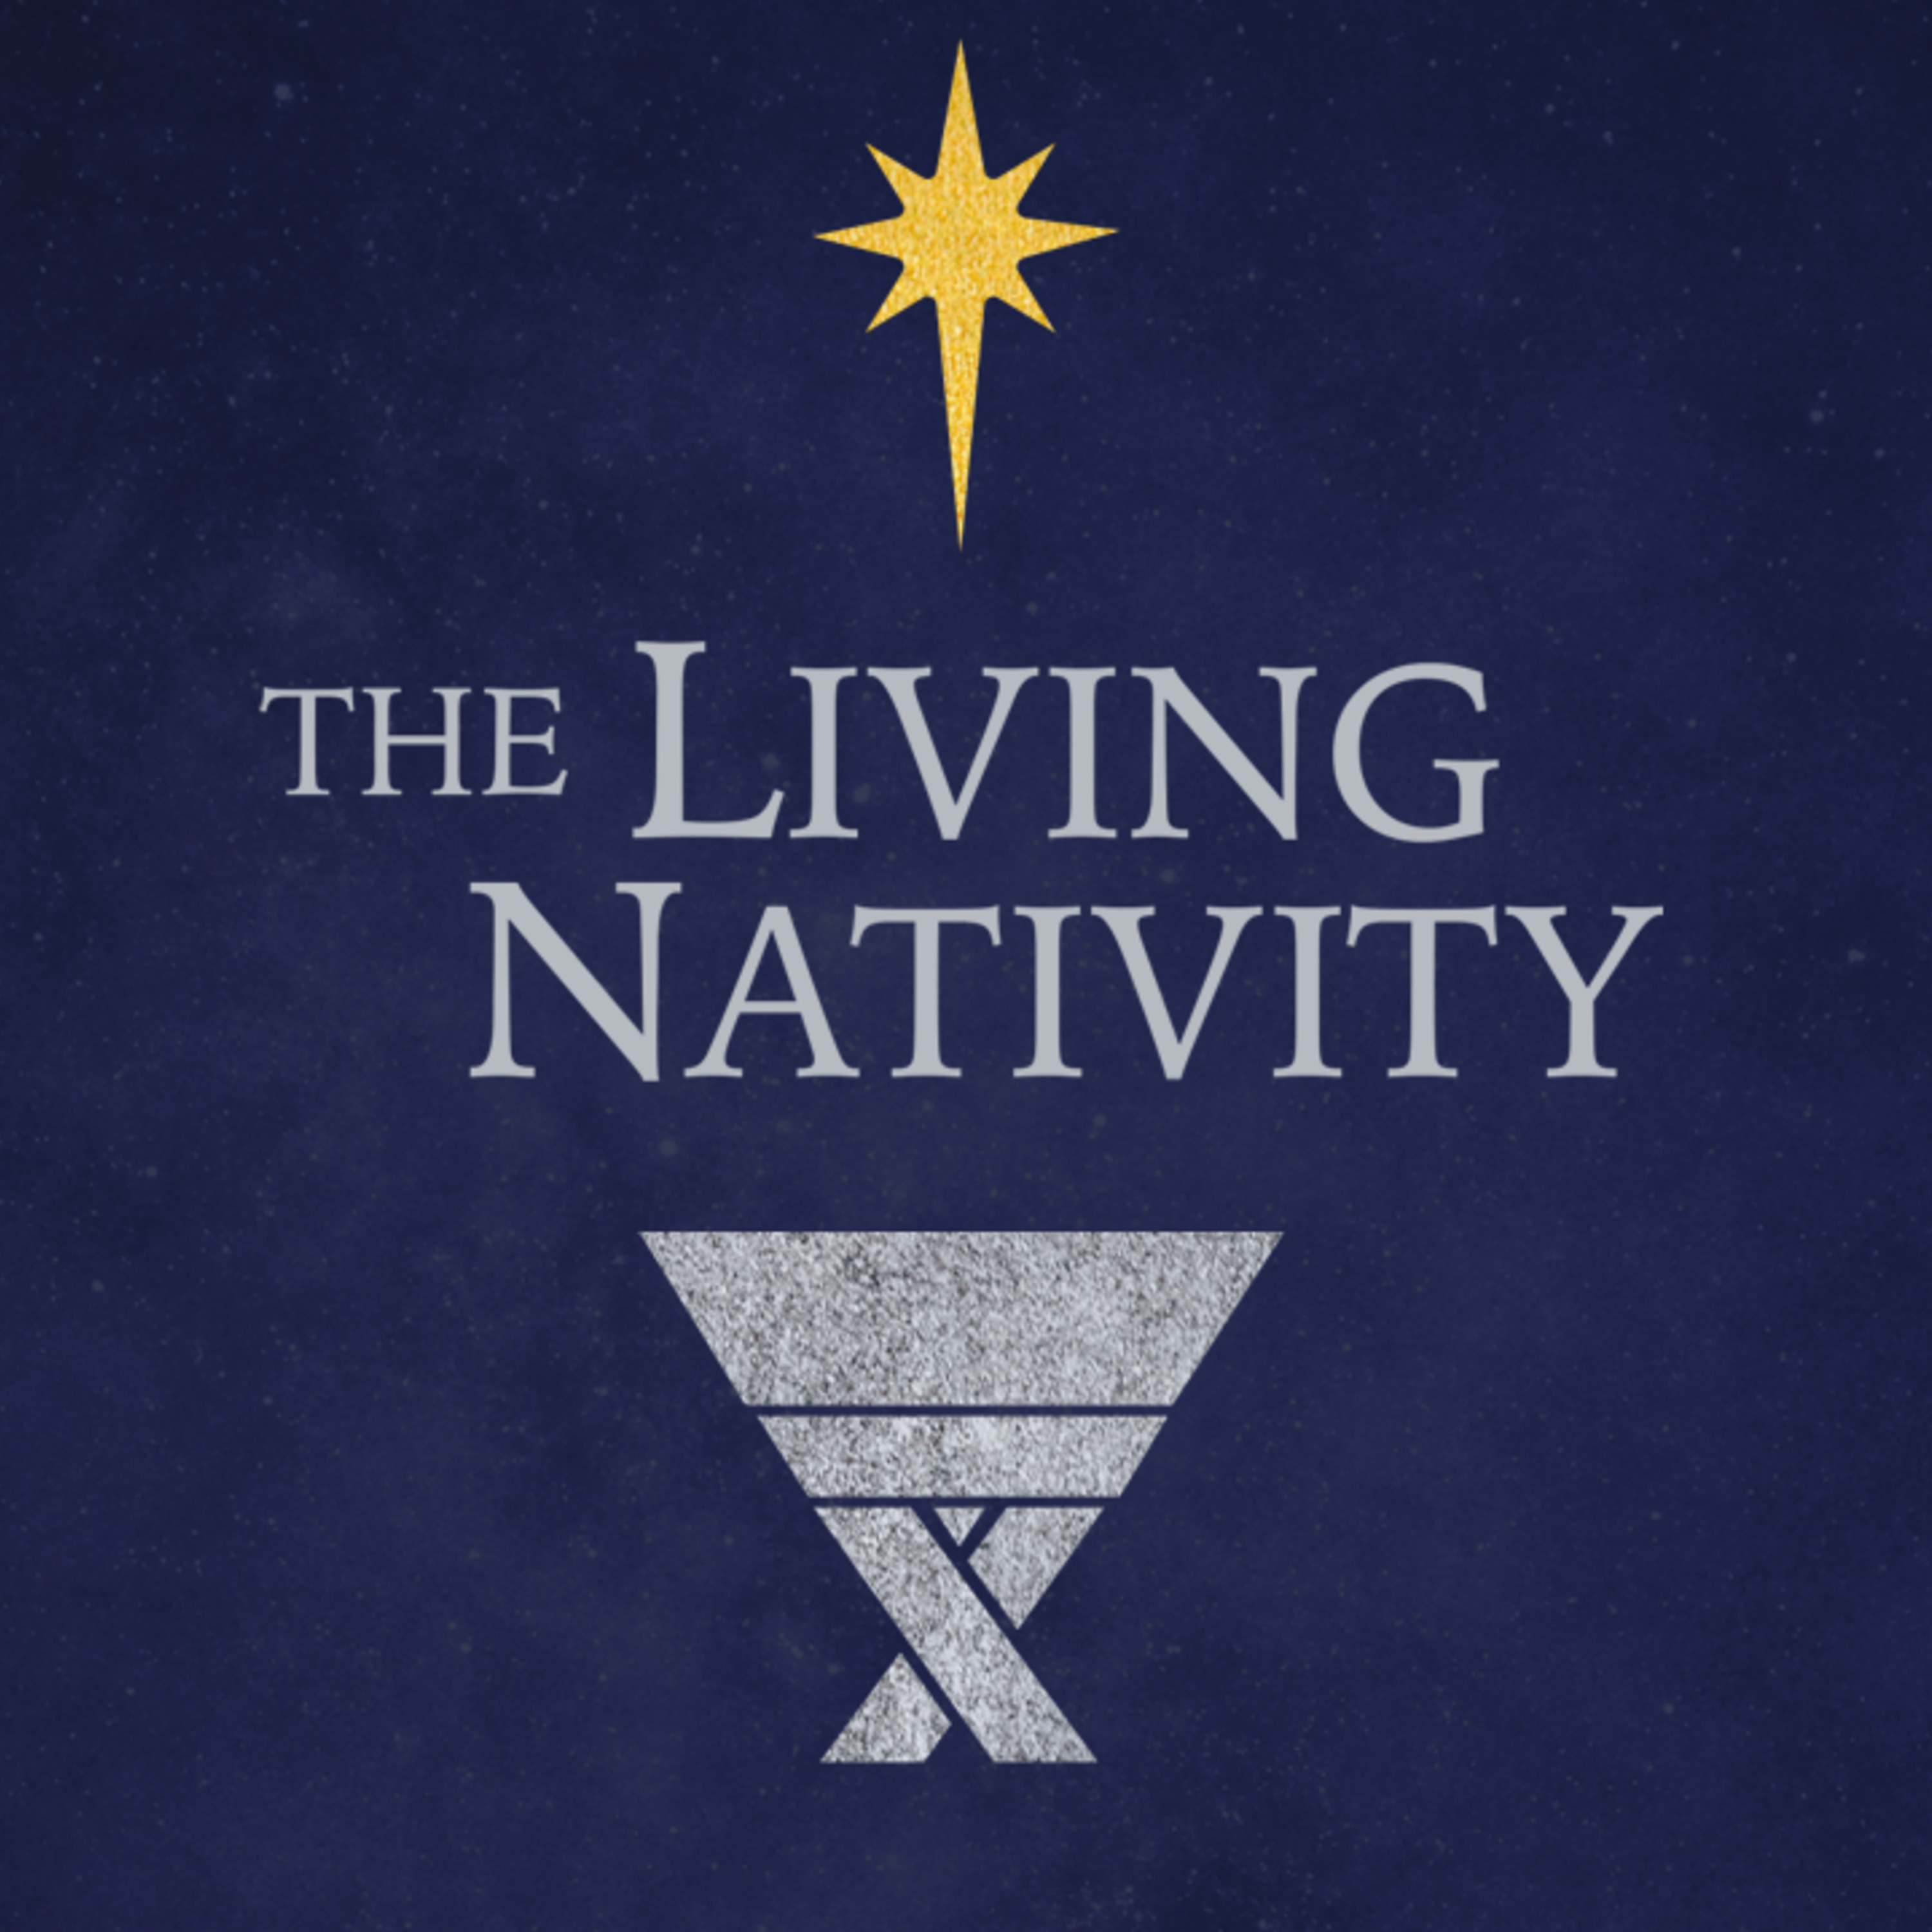 Episode 97: Roswell Presbyterian Church  |  The Living Nativity: To Sum it Up  |  Sunday, January 3, 2021